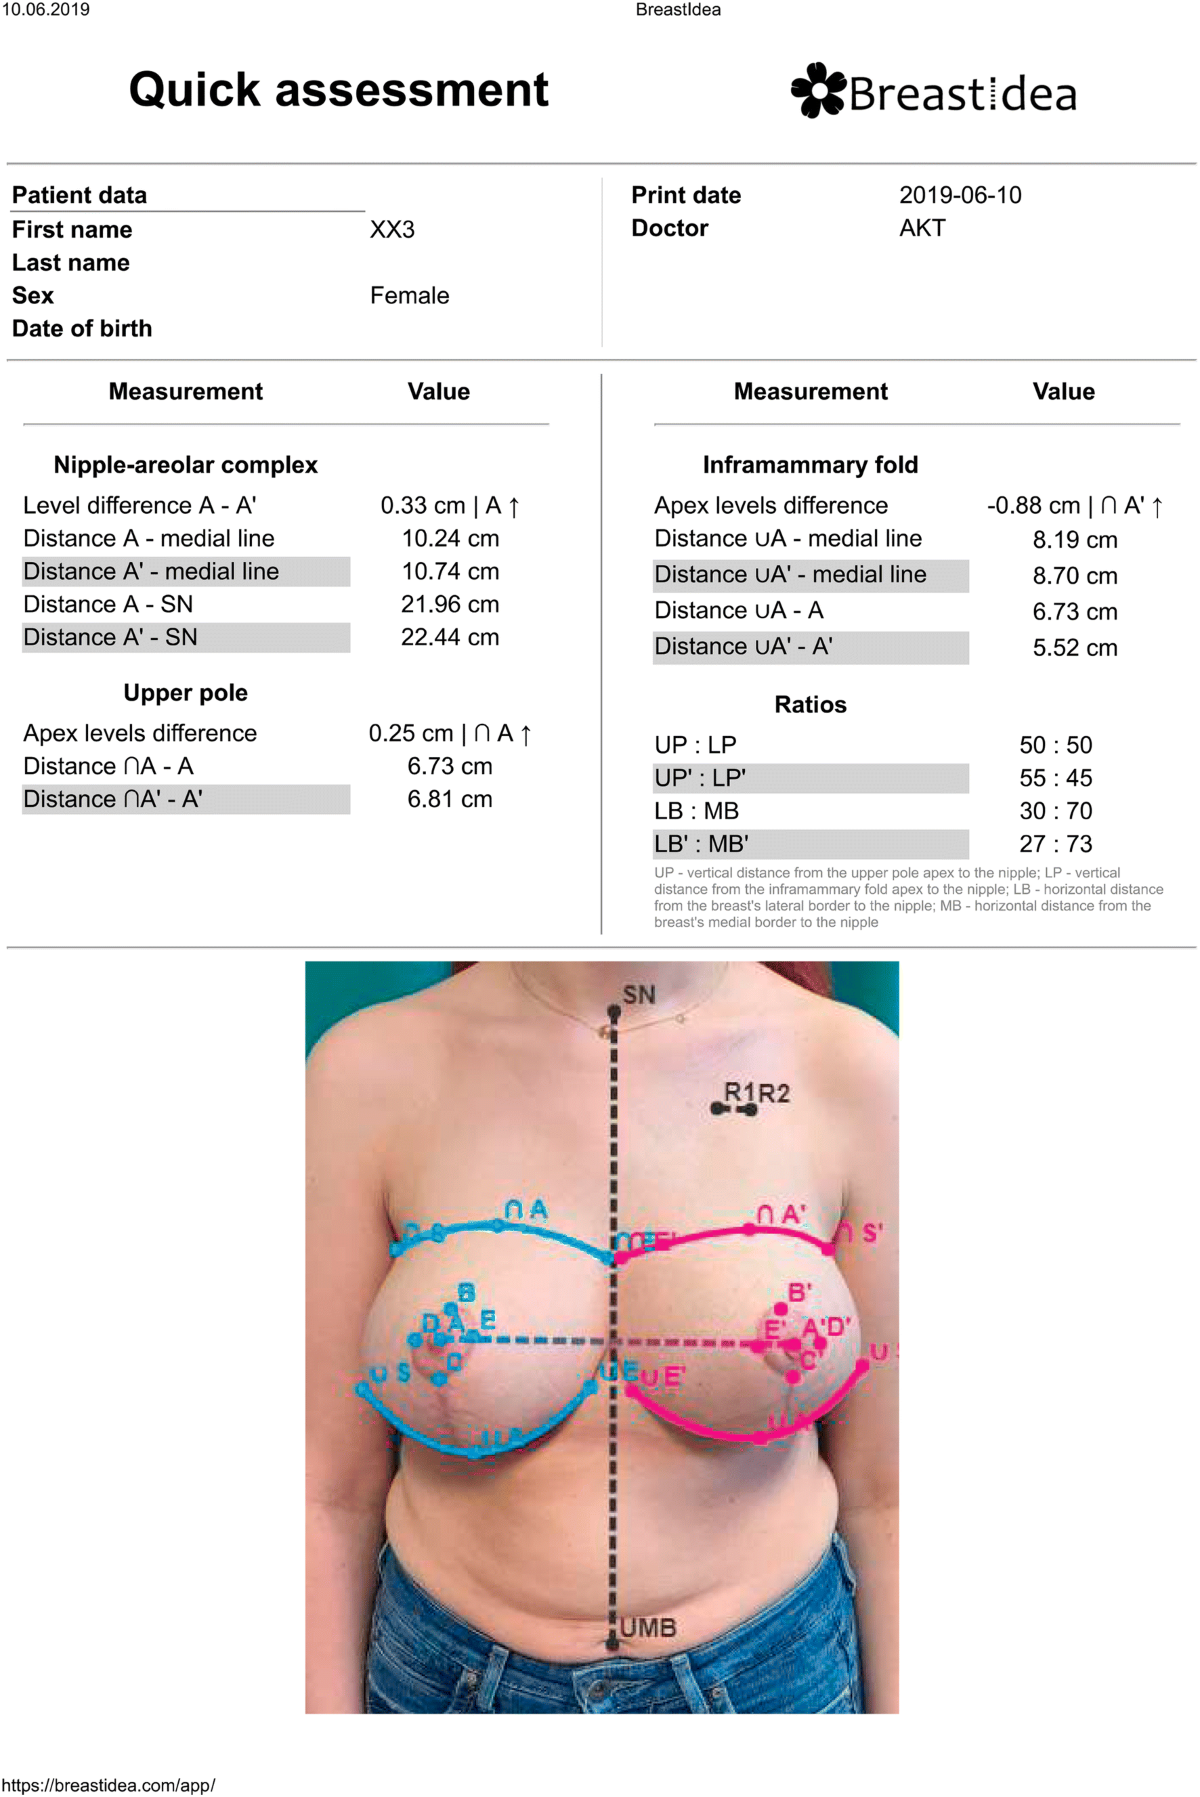 Breast anthropometric results for the following indexes: distance